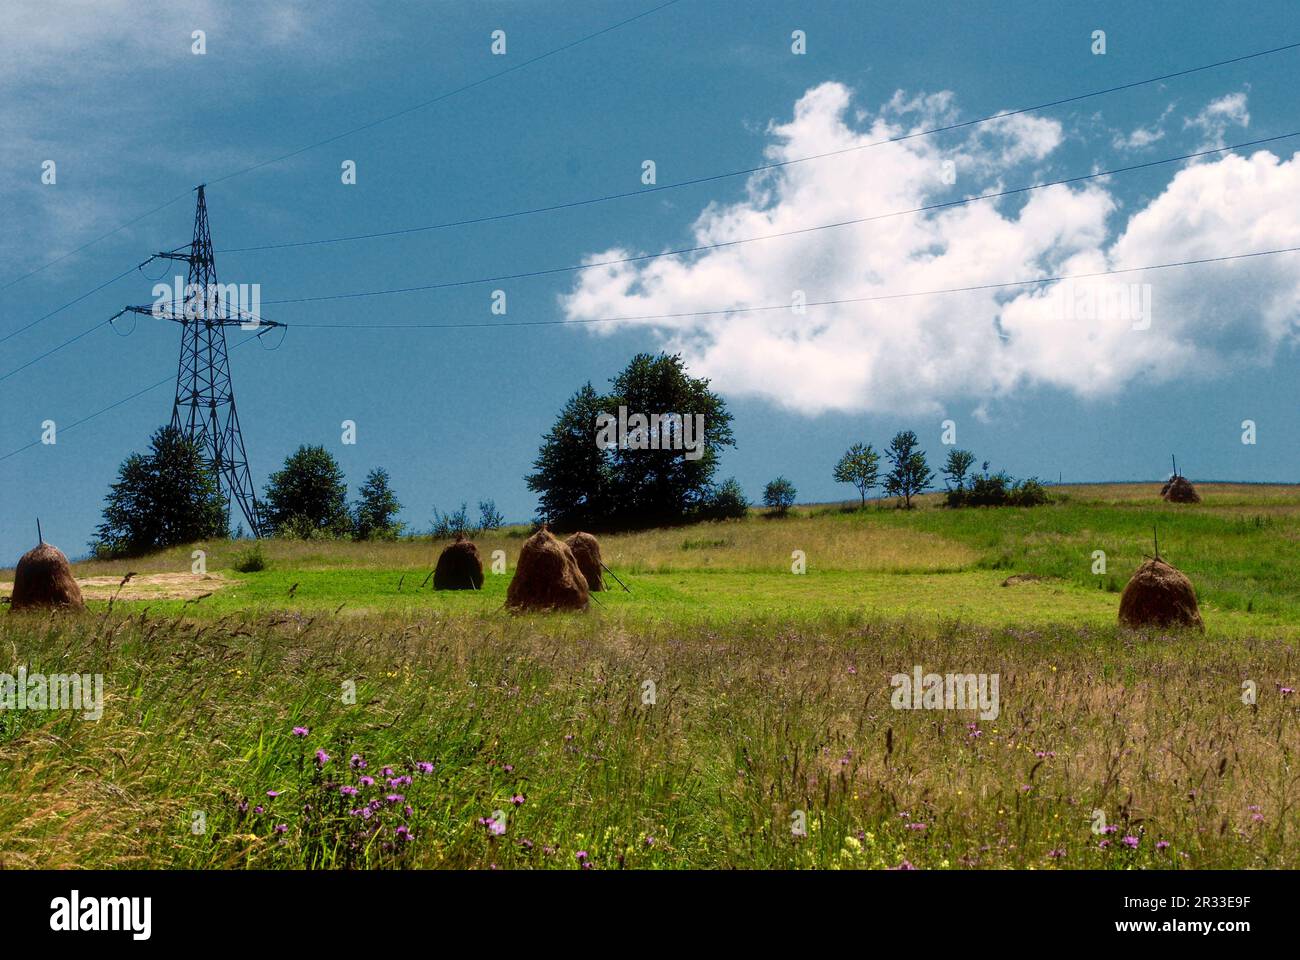 Rural landscape and electrified track Stock Photo